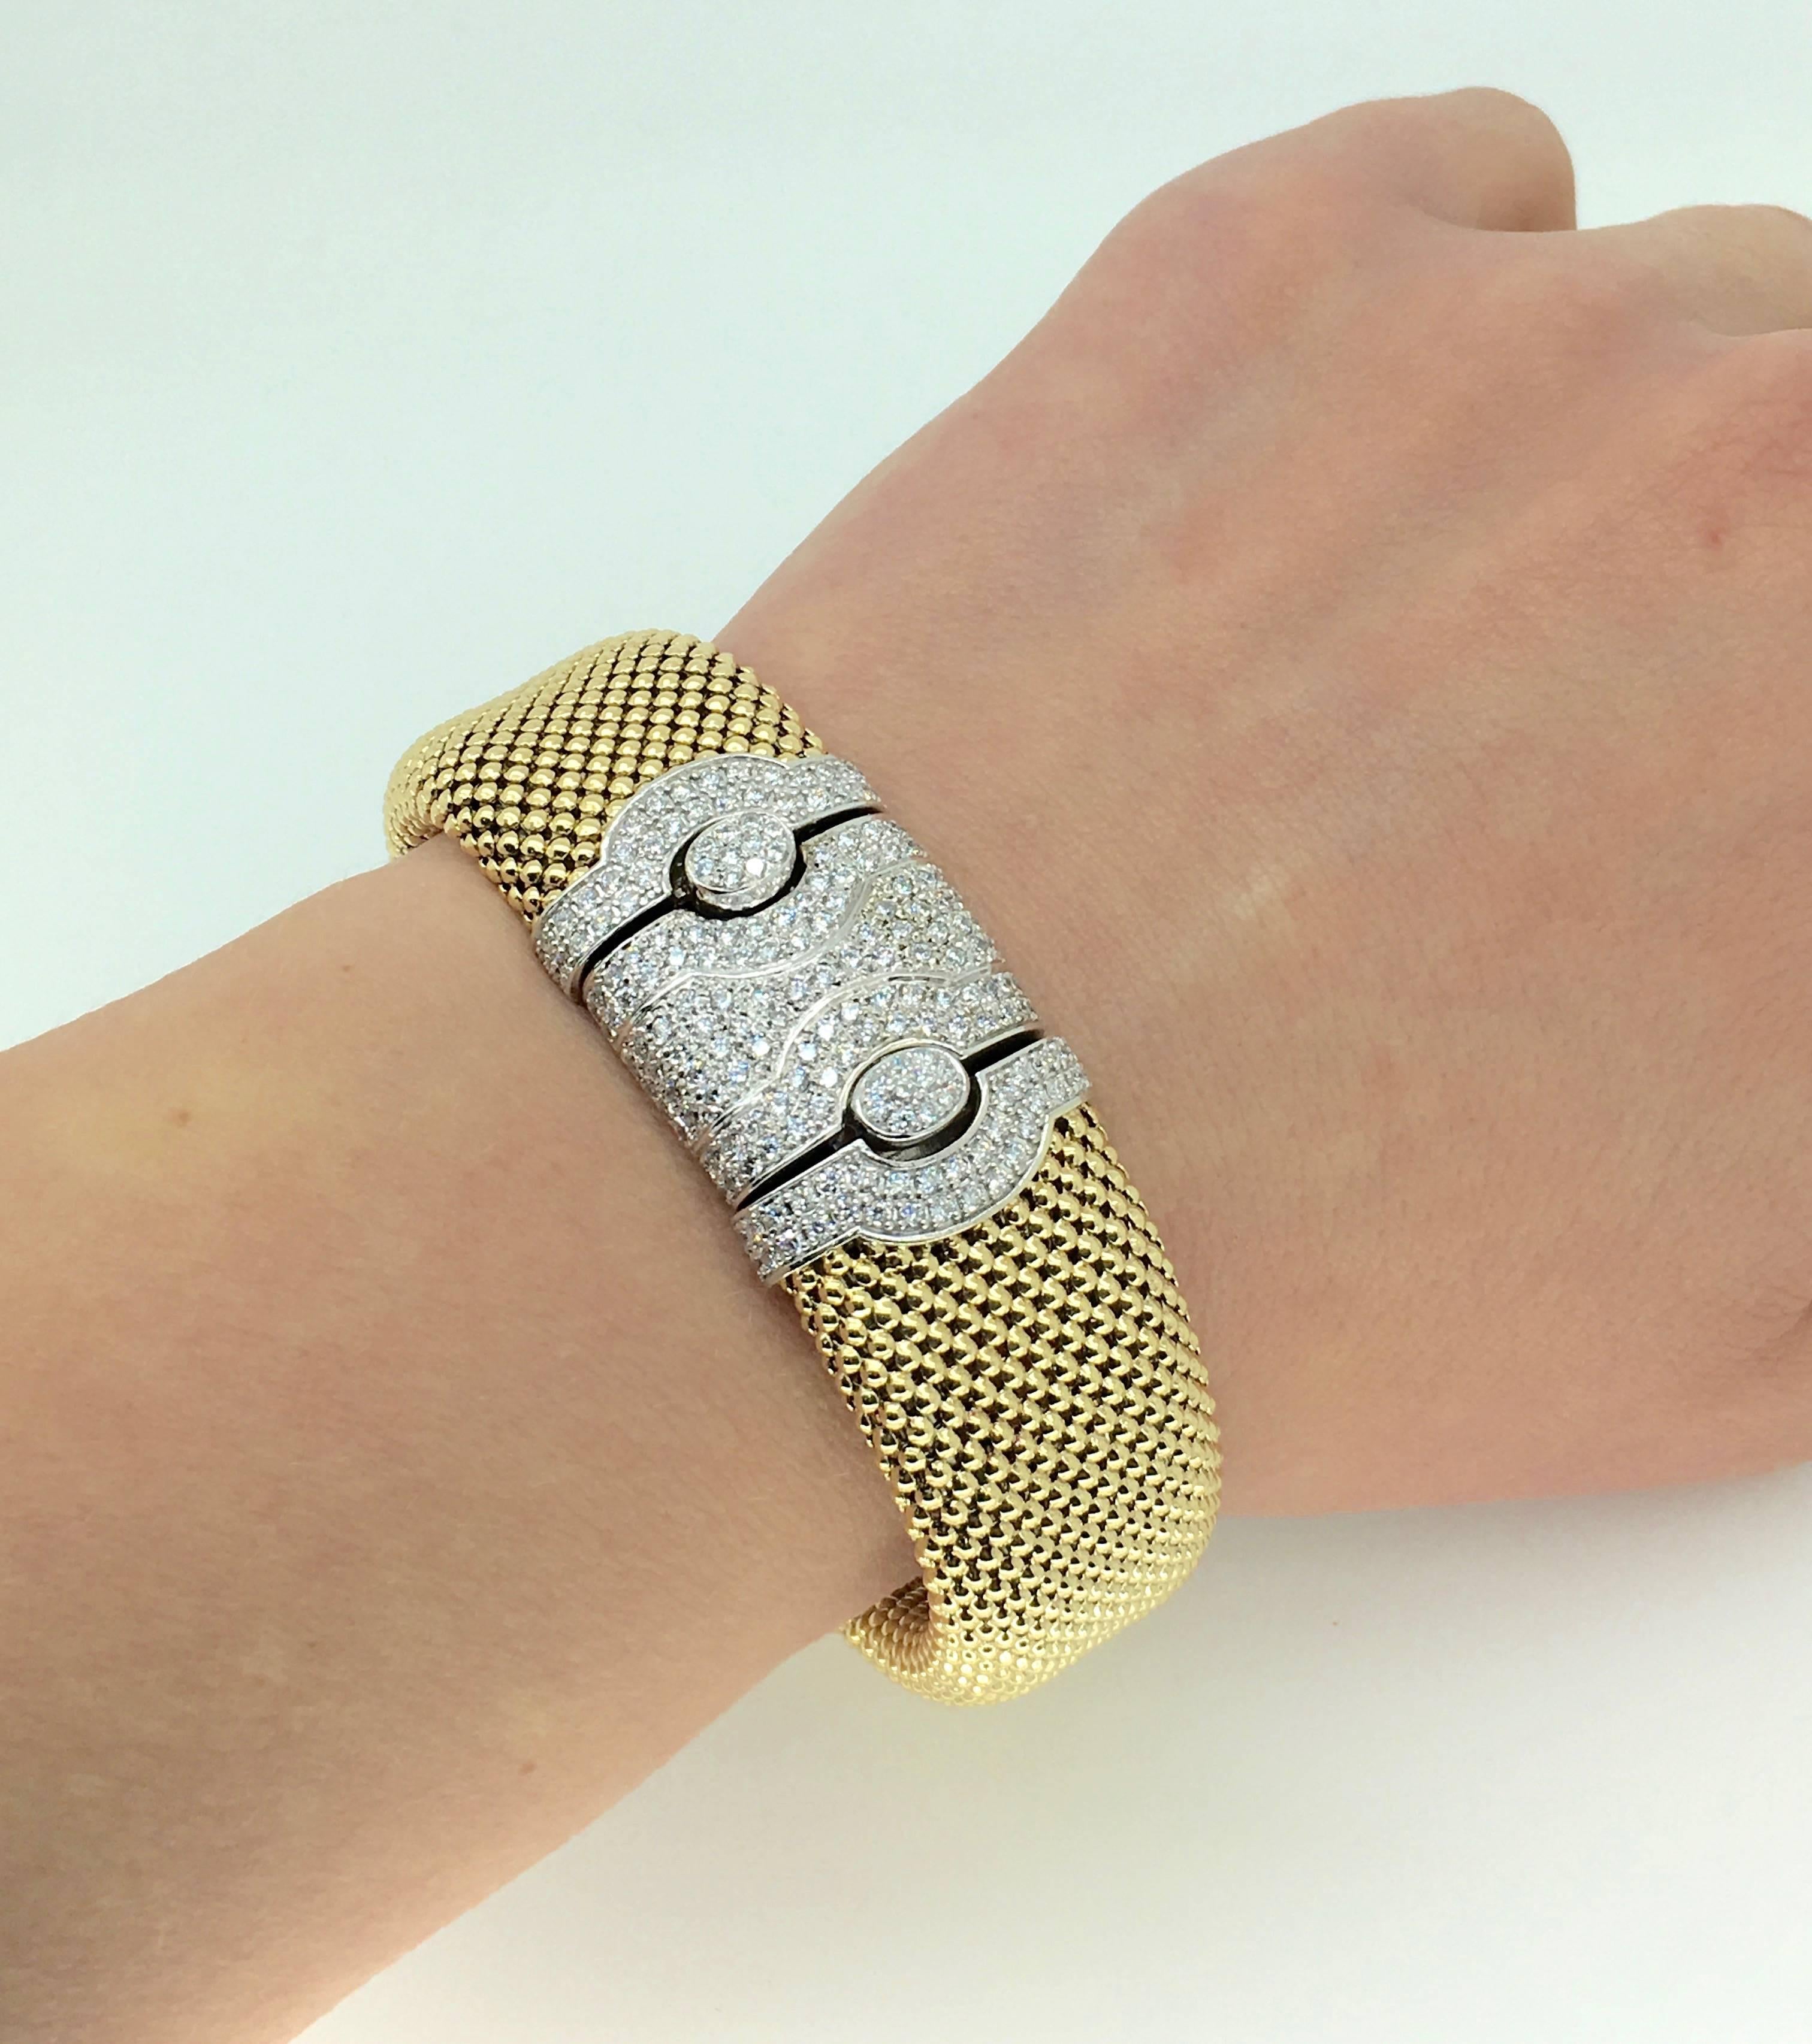 Gorgeous mesh 14K yellow gold bracelet features 193 Round Brilliant Cut Diamonds. The clasp is a well crafted concealed box clasp encrusted with diamonds. There is 2.75CTW of diamonds in this stunning piece, the diamonds display an average of G-H